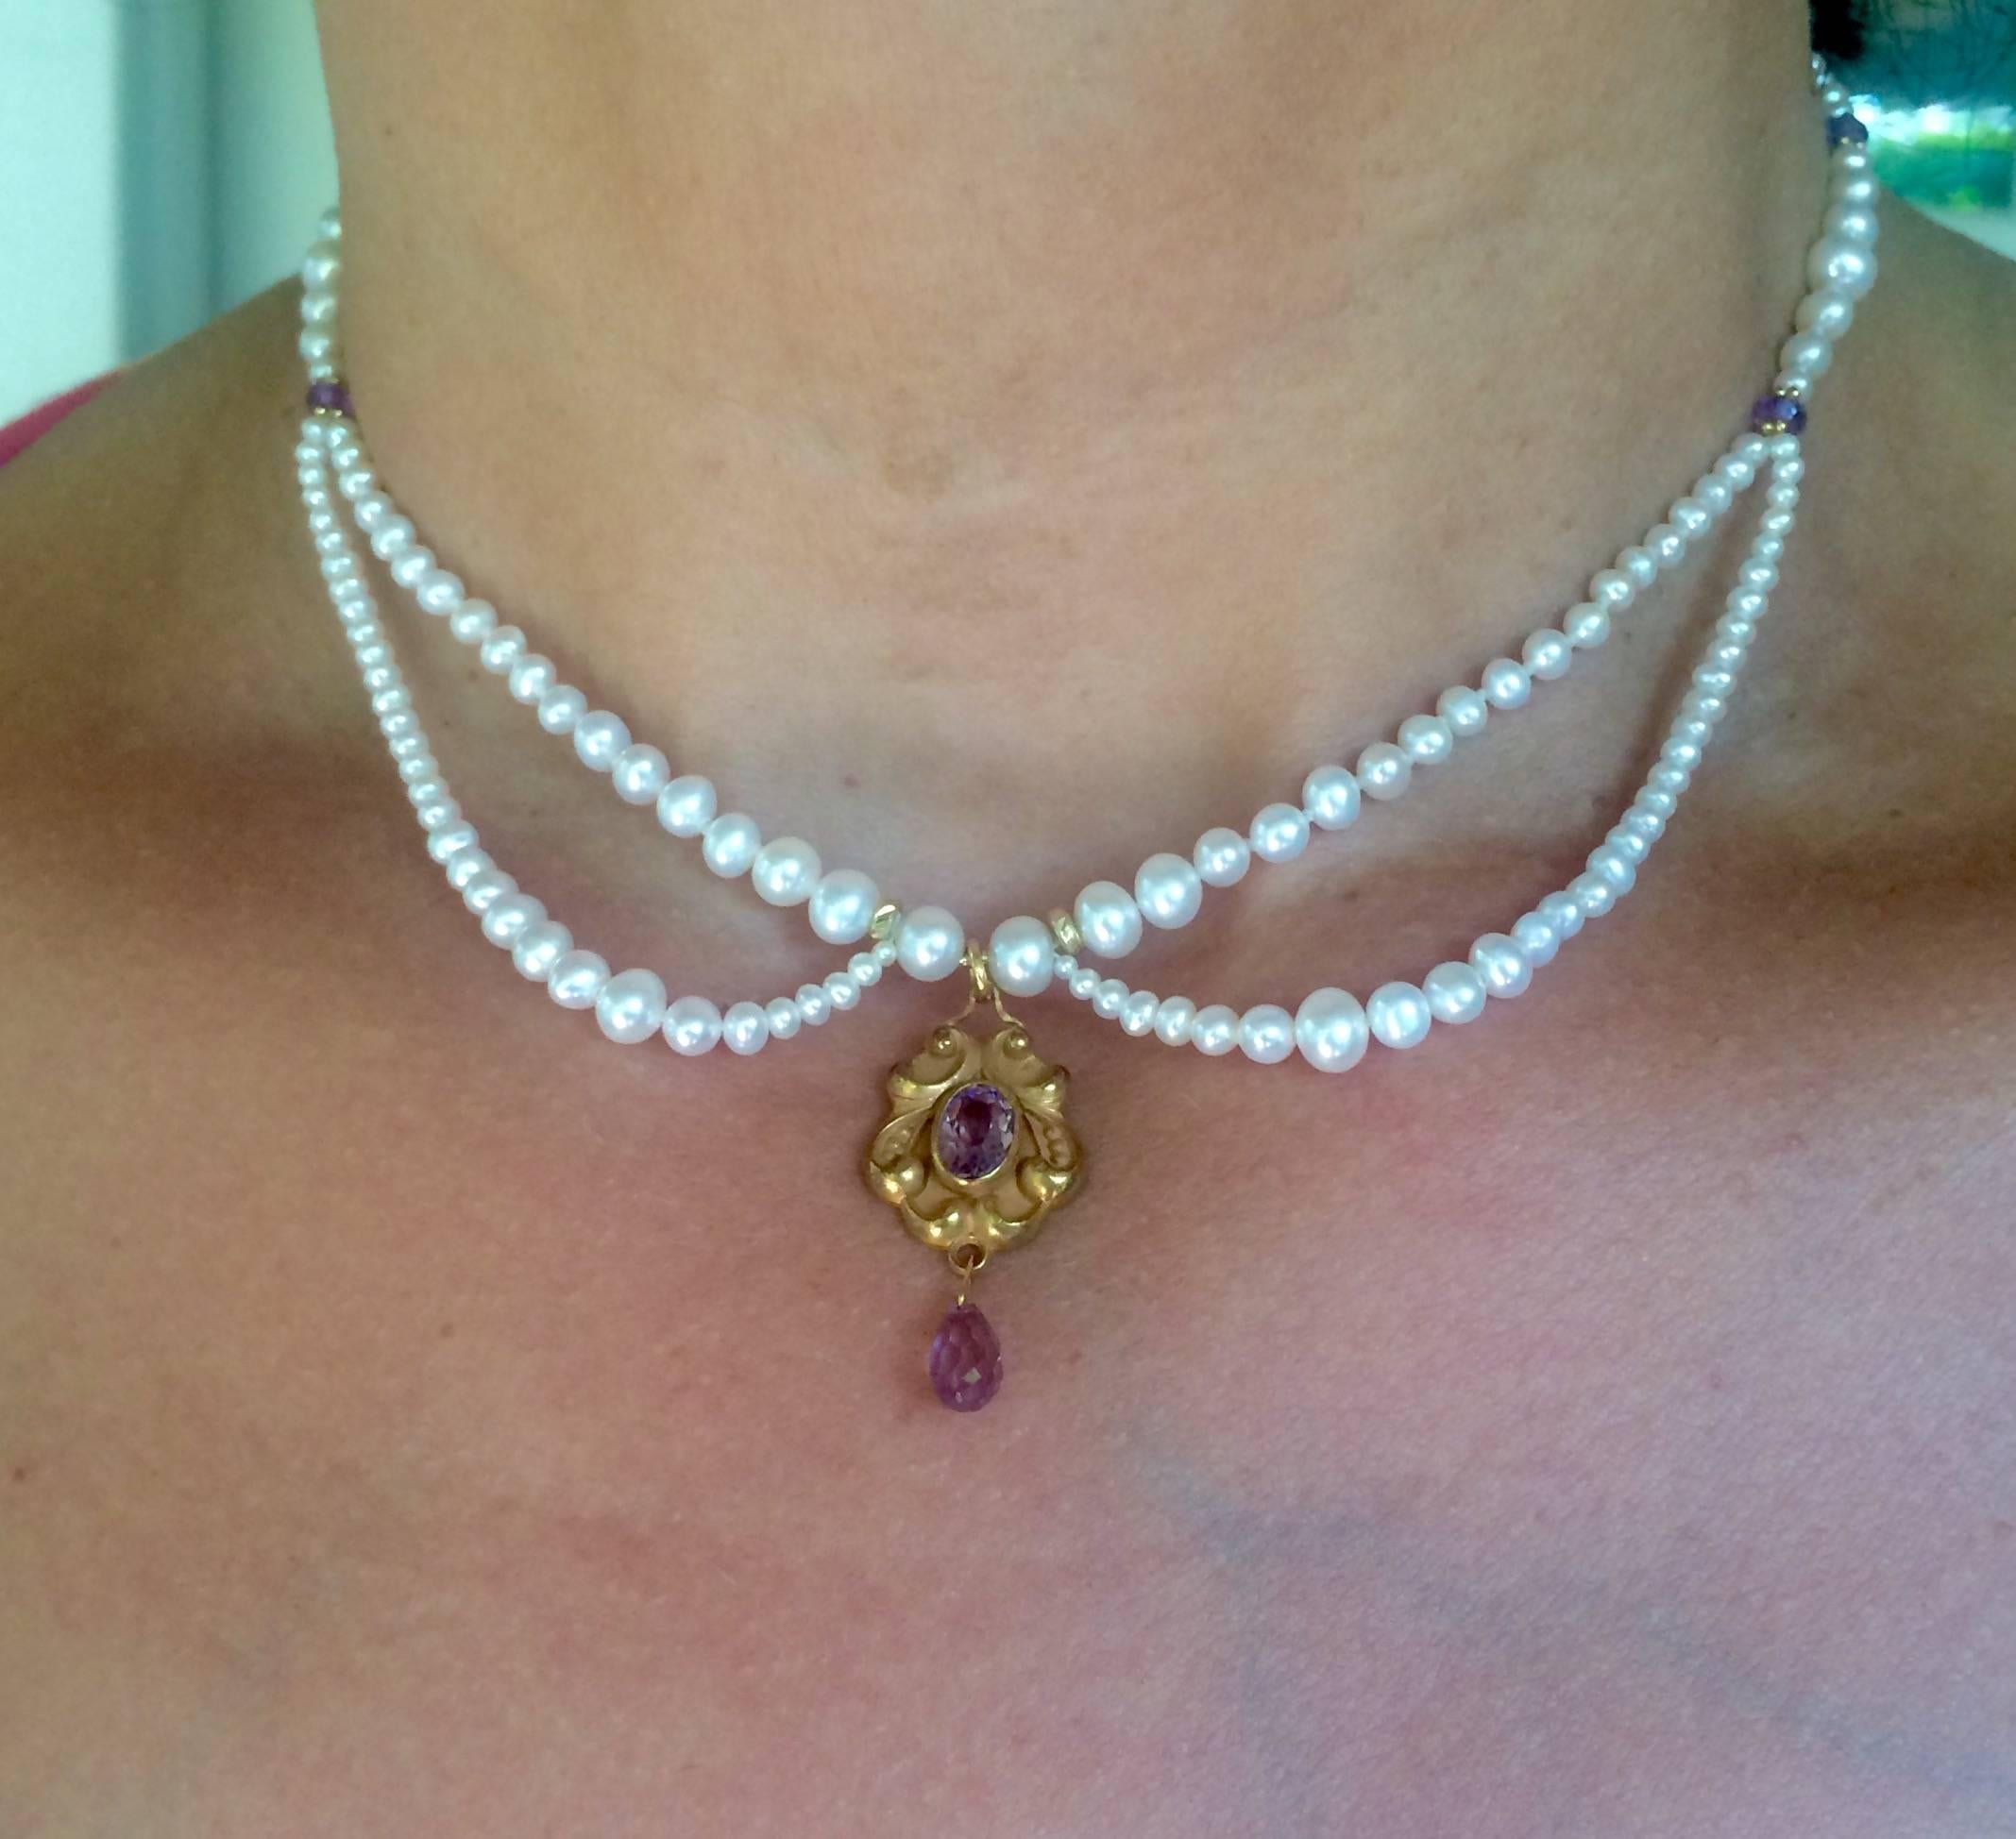 Bead Marina J Graduated Pearl and Amethyst Necklace with Vintage Gold Pendant